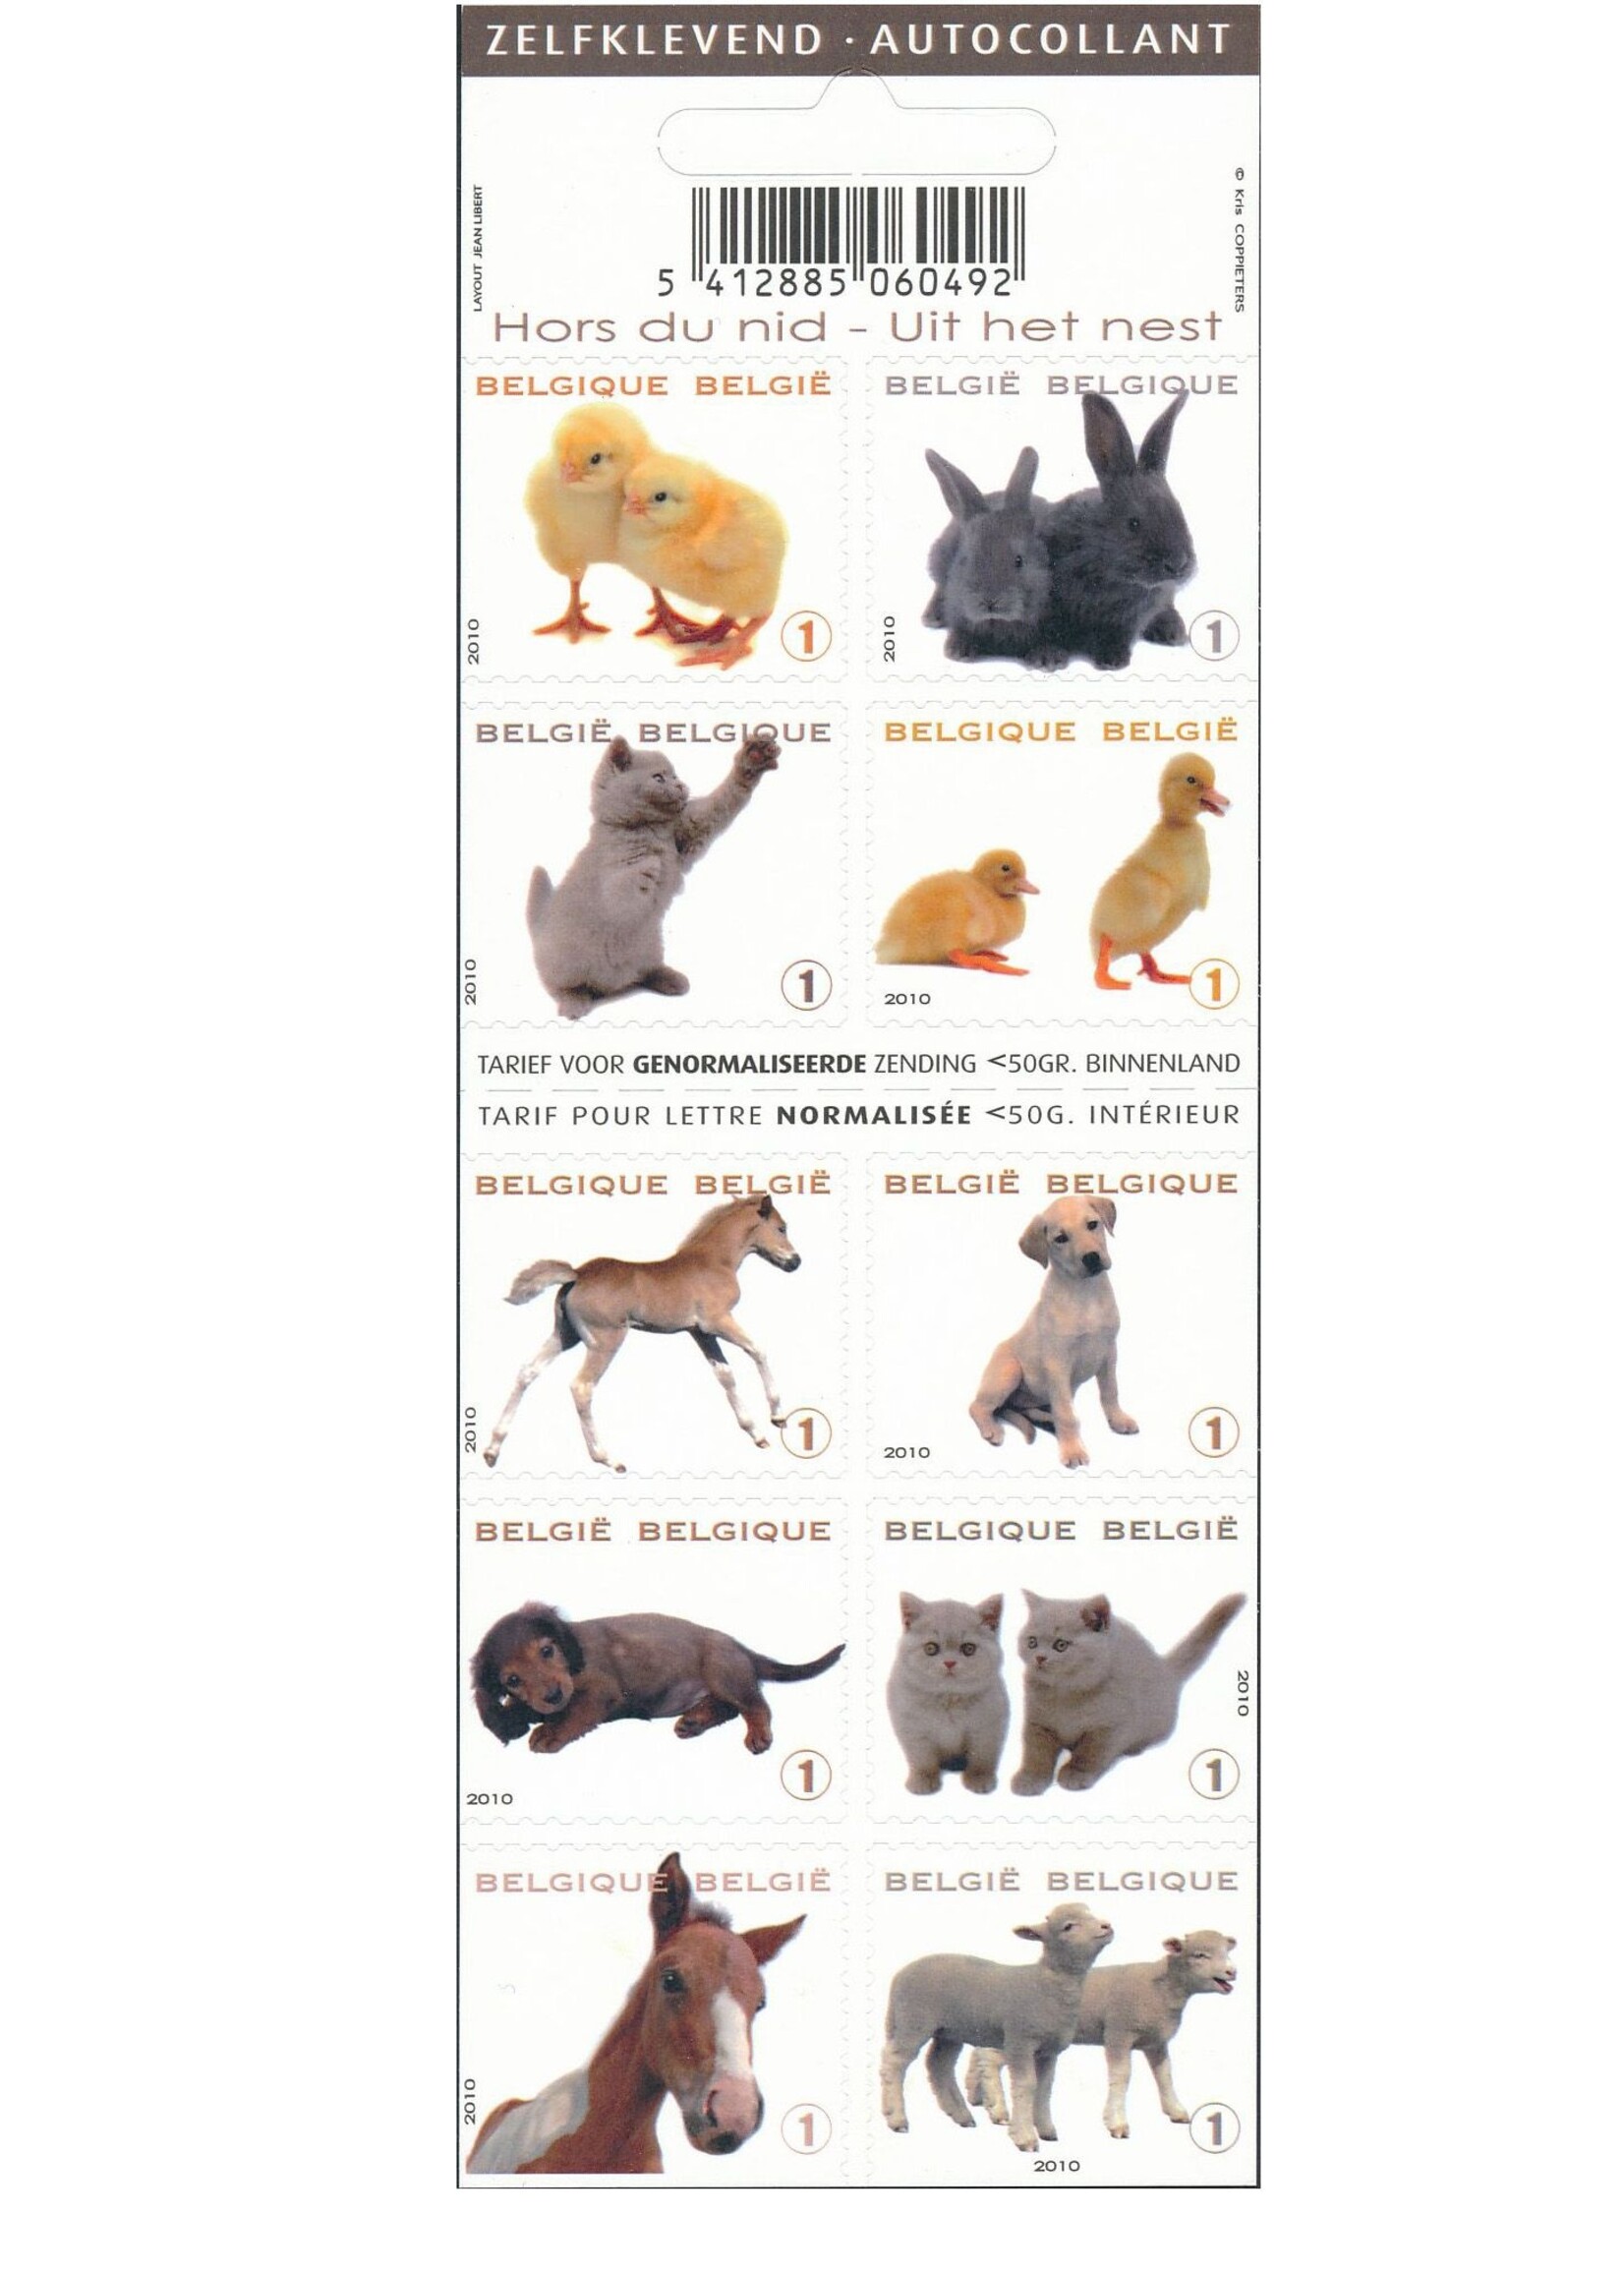 Theme Animals 1 - Booklet with 10 self-adhesive stamps - Rate 1, Belgium